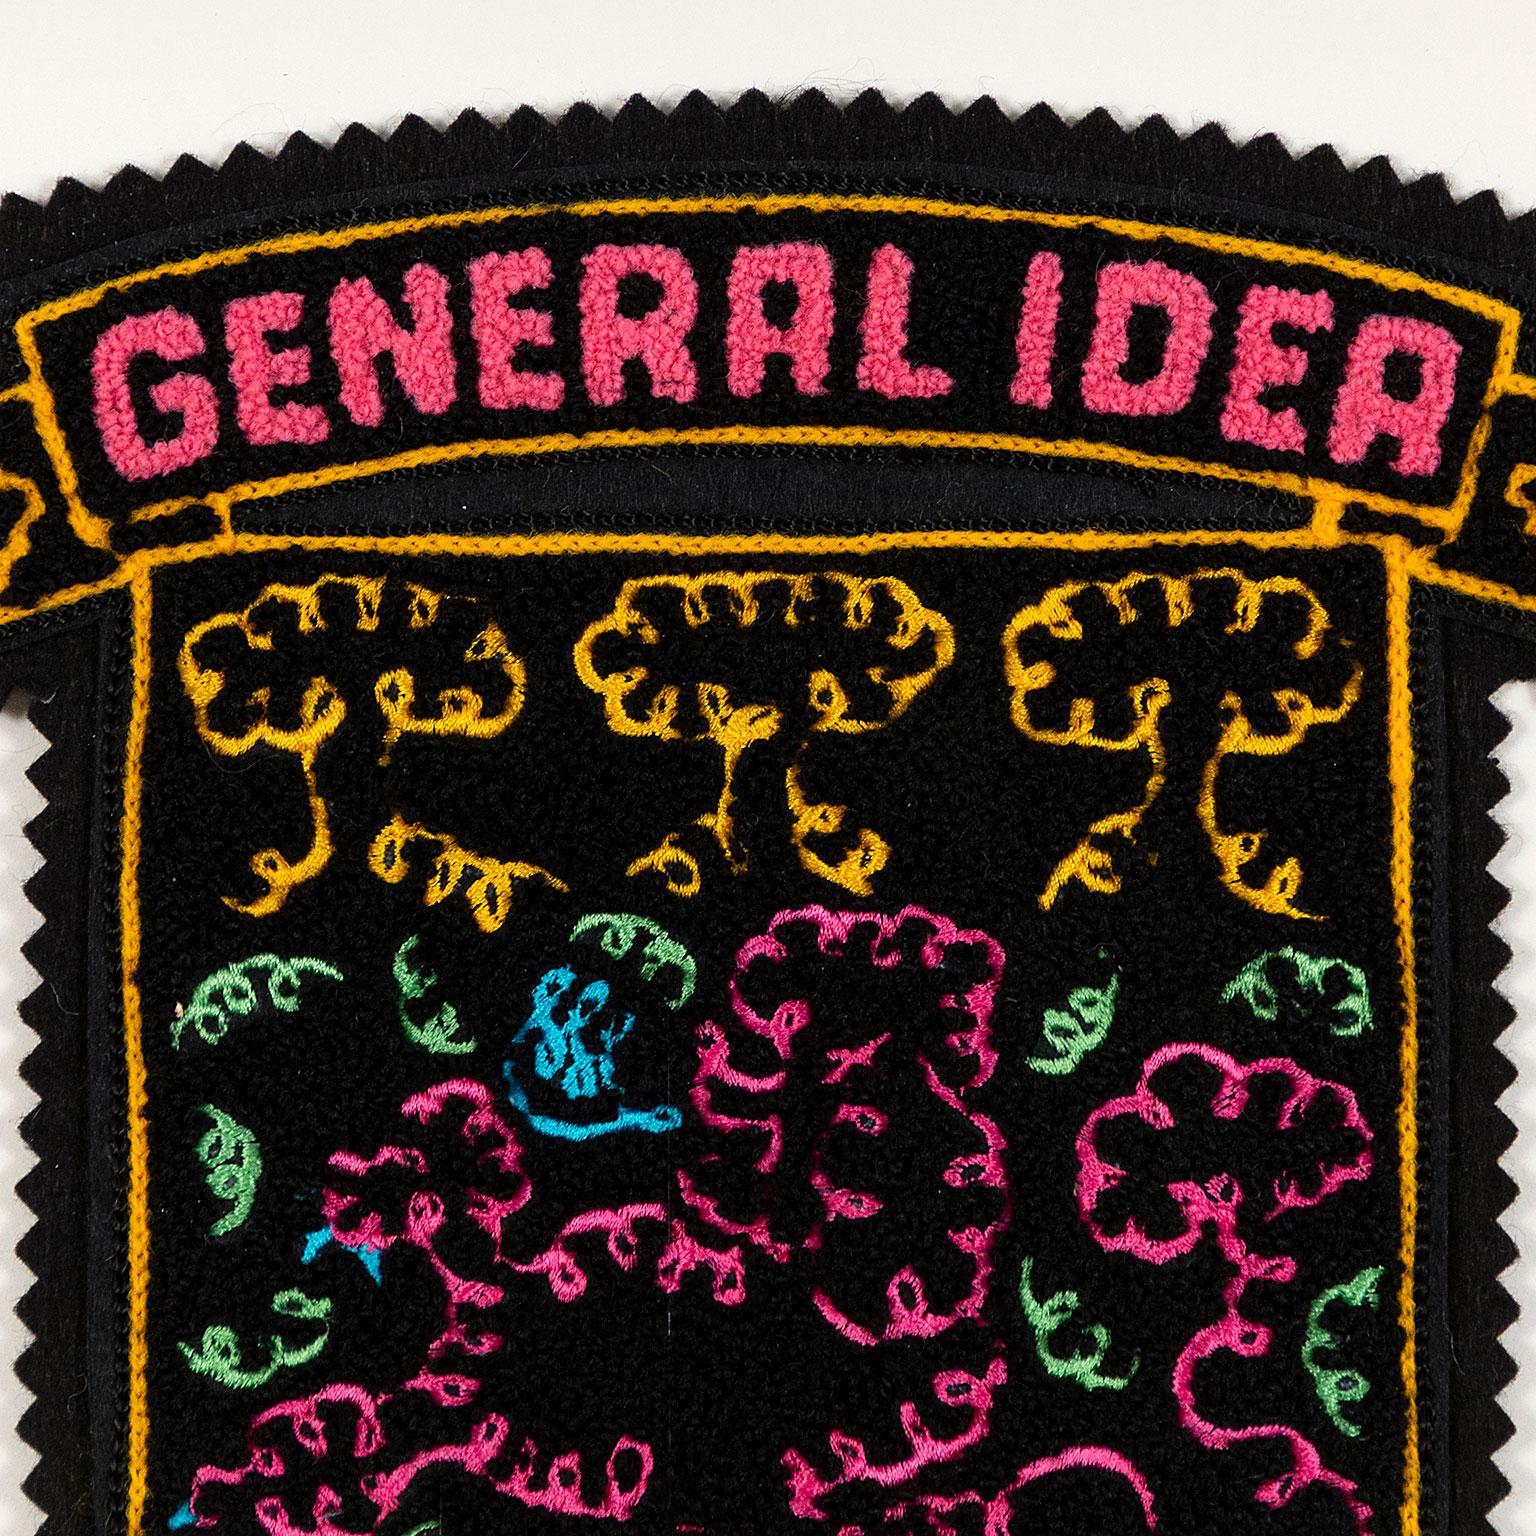 In 1967, General Idea was founded in Toronto by AA Bronson (b. 1946), Felix Partz (1945-1994), and Jorge Zontal (1944-1994). Over the course of 25 years, they made a significant contribution to postmodern and conceptual art in Canada and